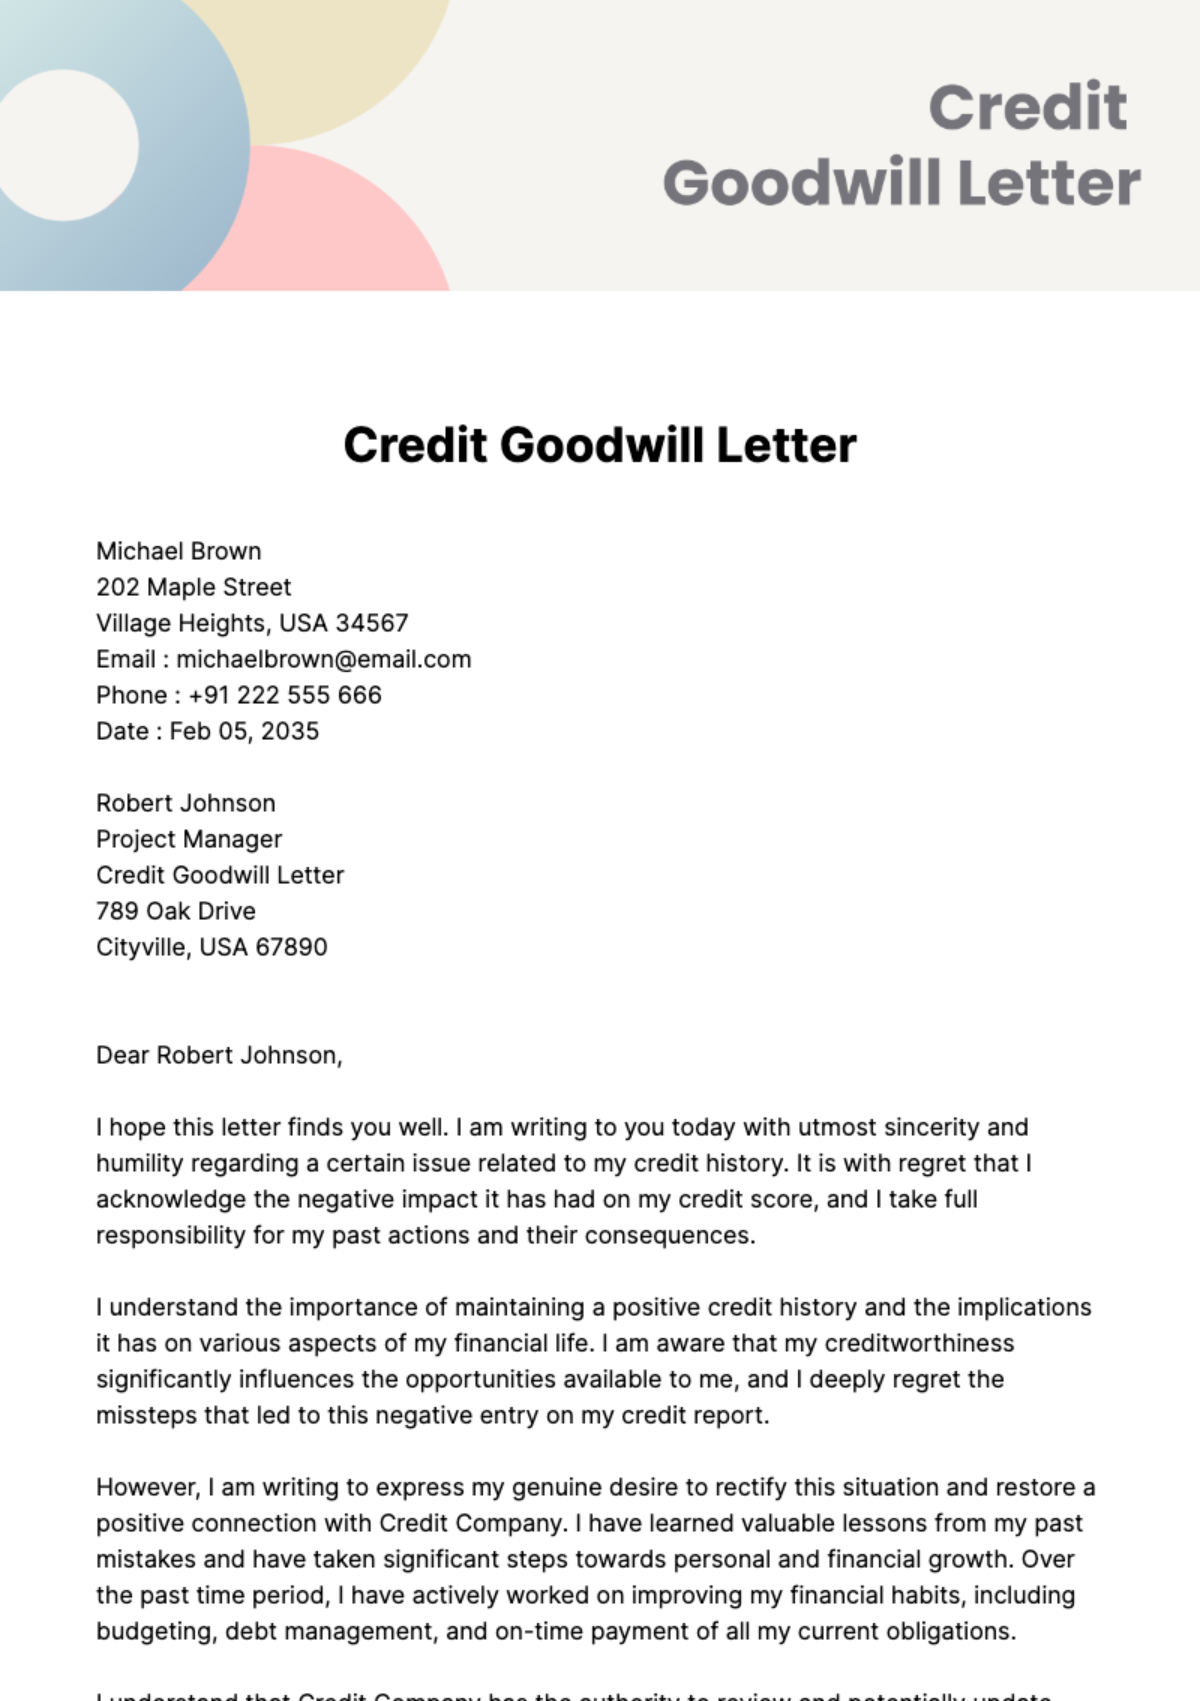 Credit Goodwill Letter Template